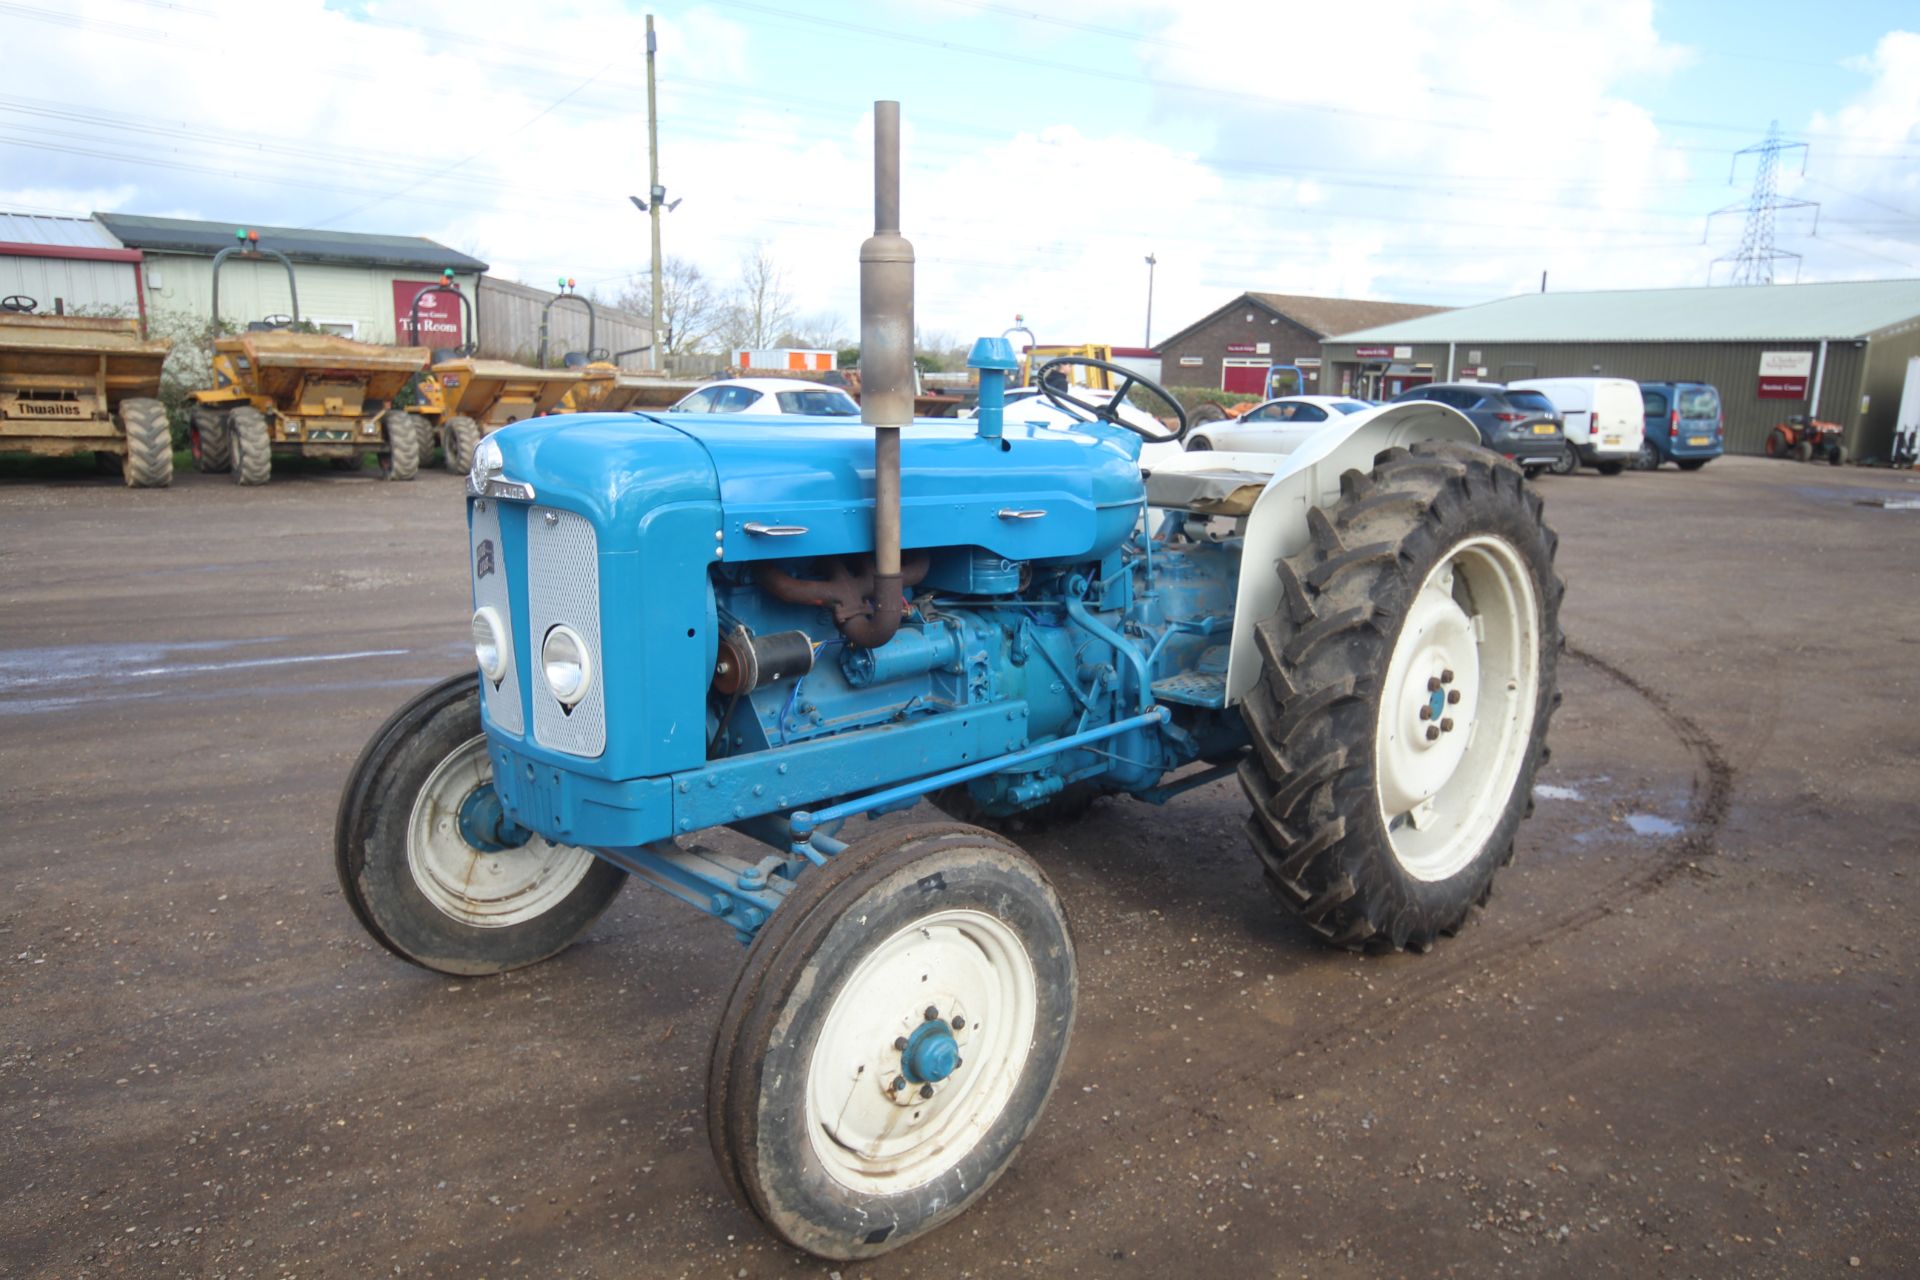 Fordson New Performance Super Major 2WD tractor. 12.4-36 rear wheels and tyres @ 99%. Key held.